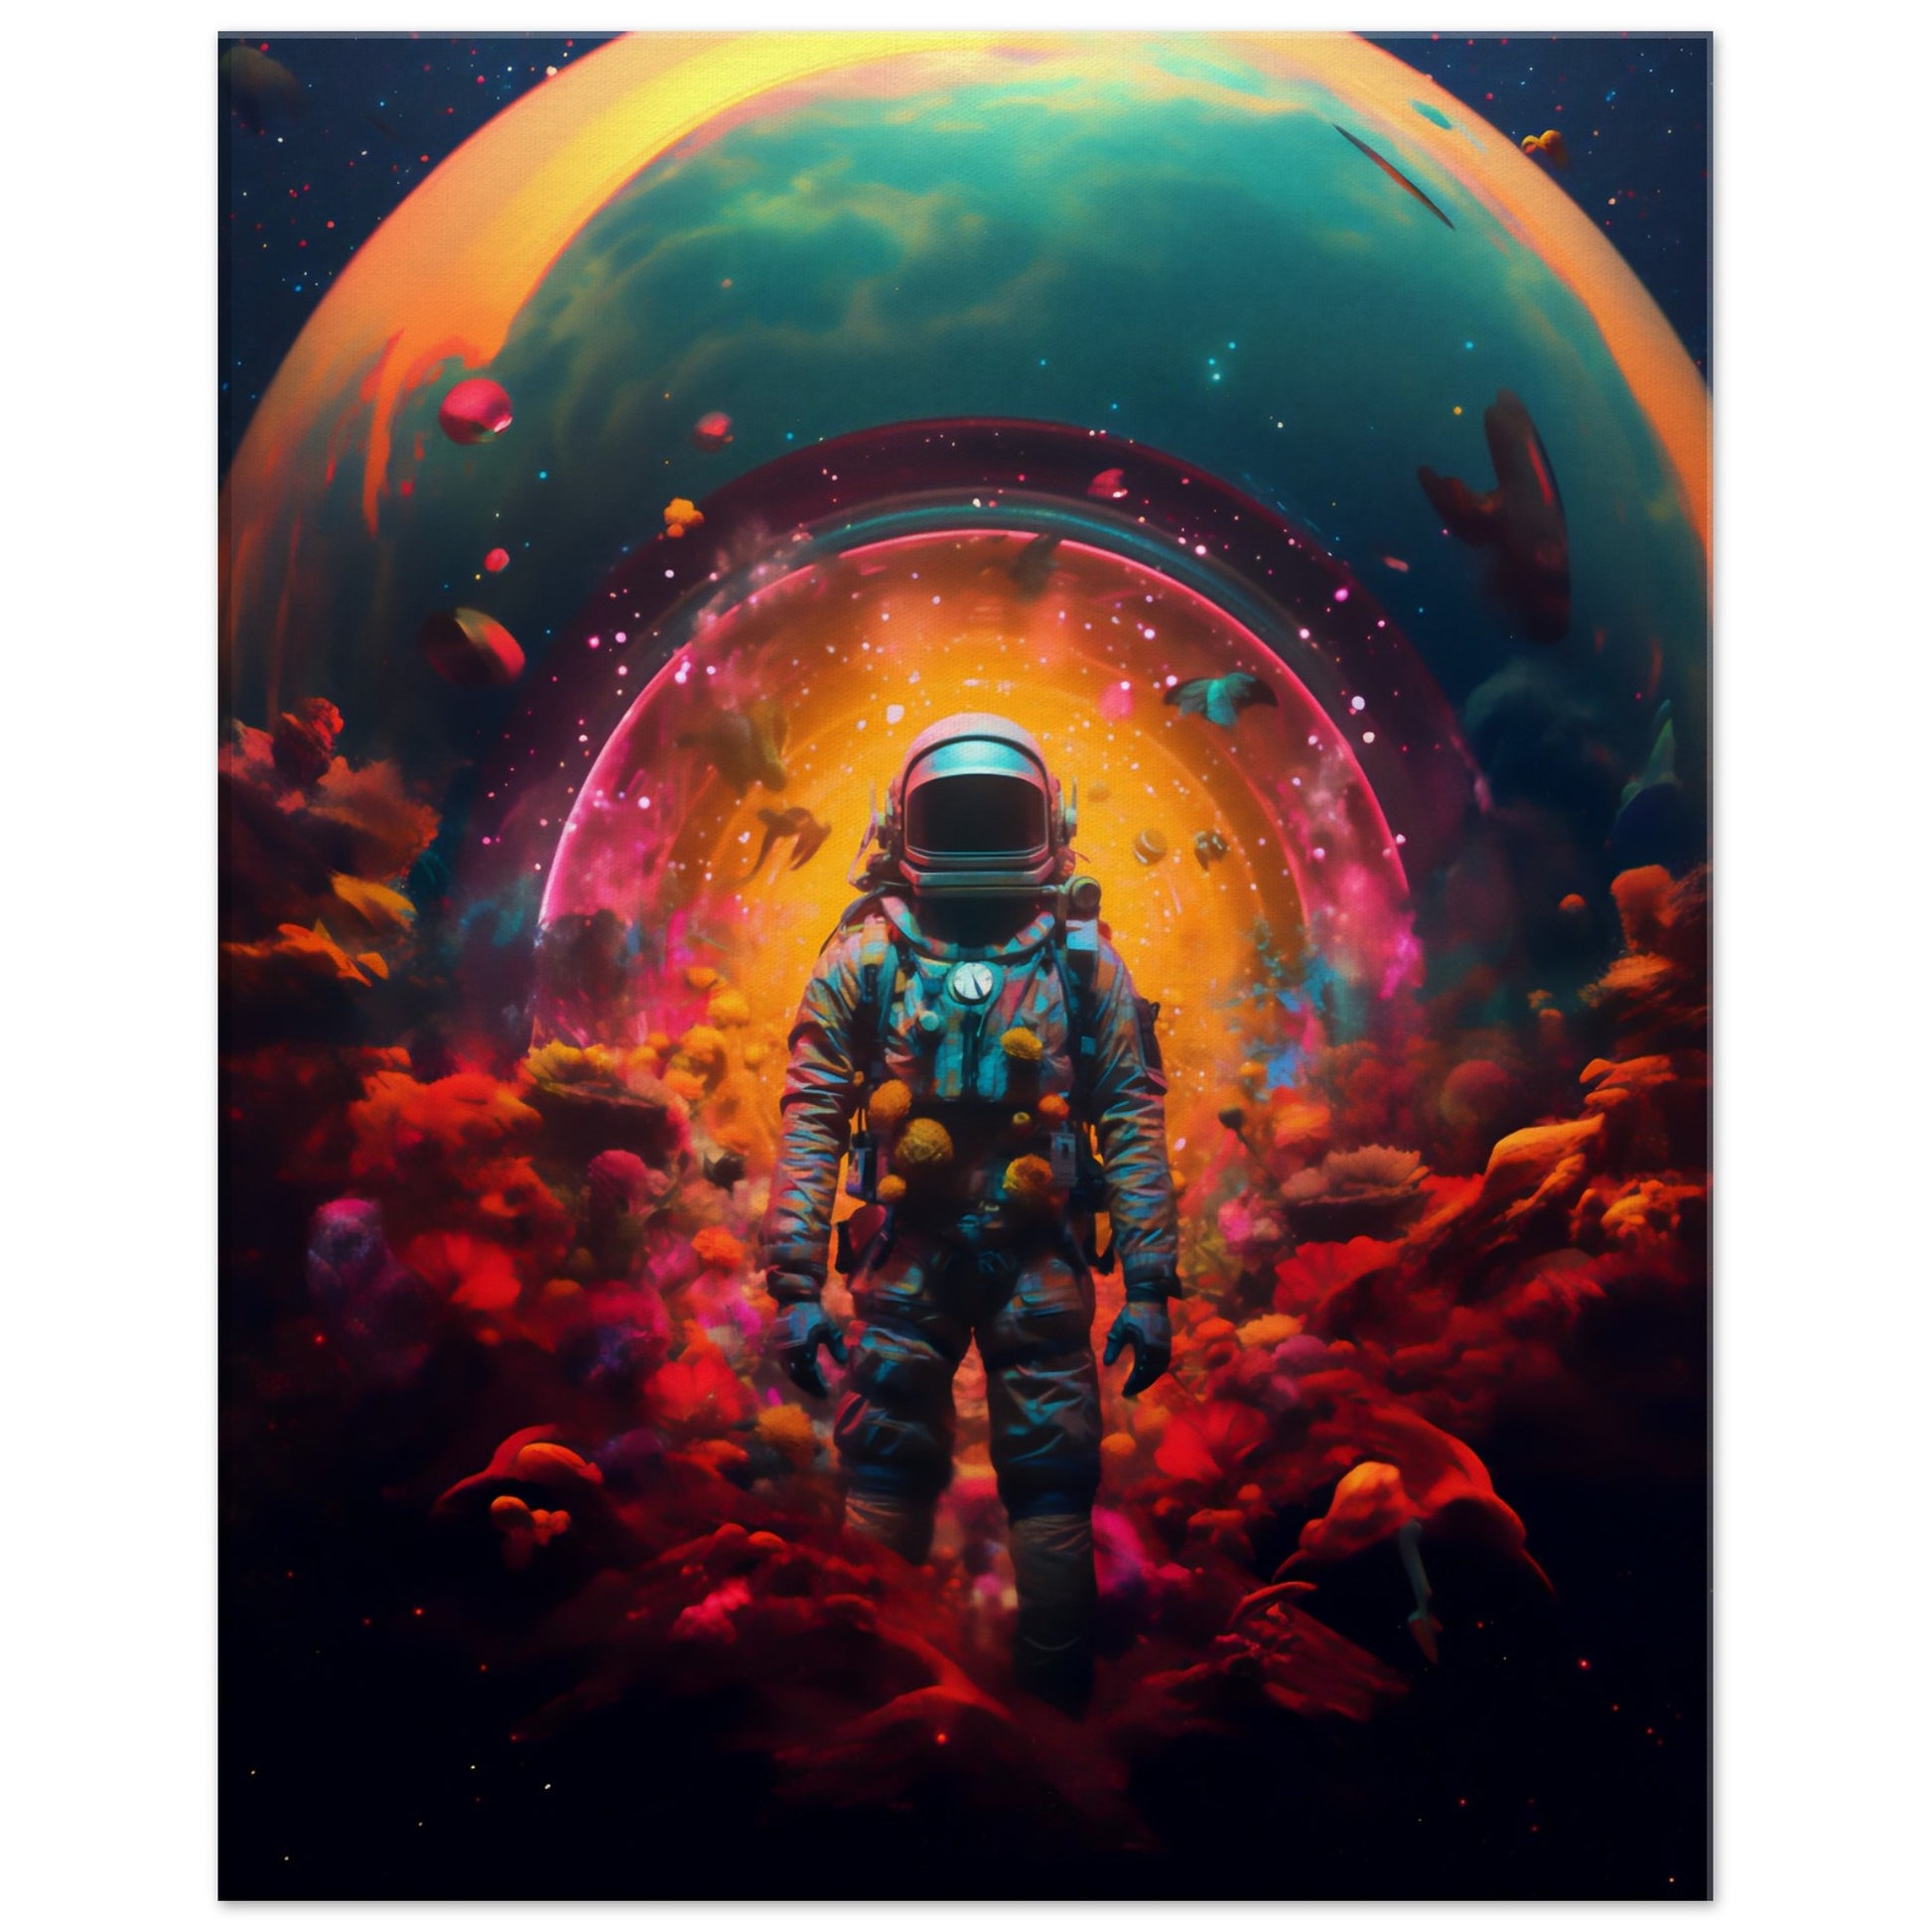 Surreal patterns and vivid colors in cosmic artwork